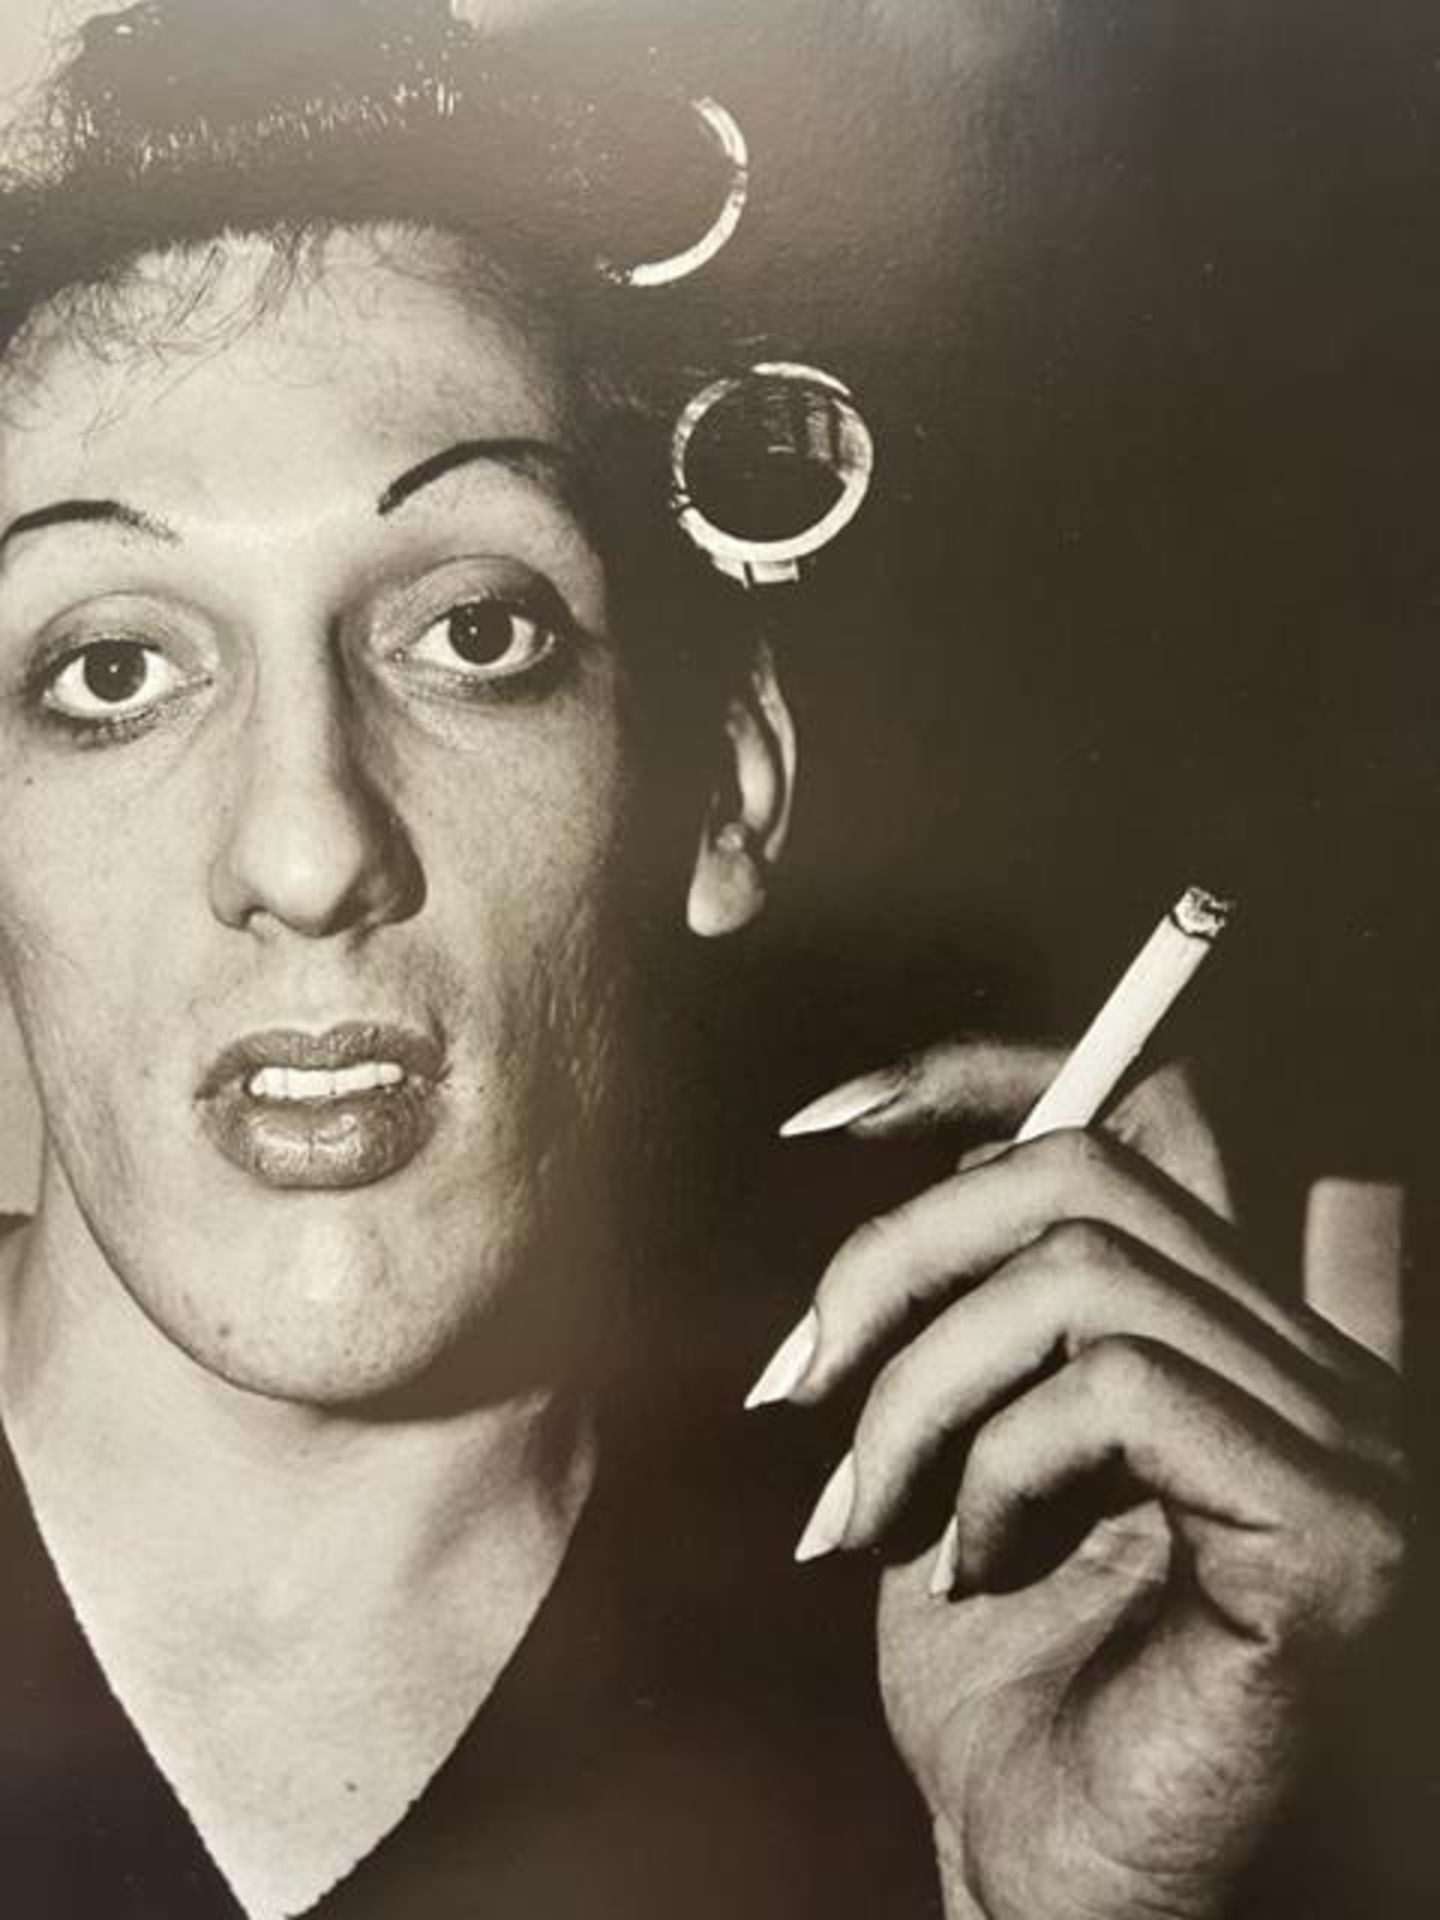 Diane Arbus "Girl with a Cigar" Print. - Image 5 of 6